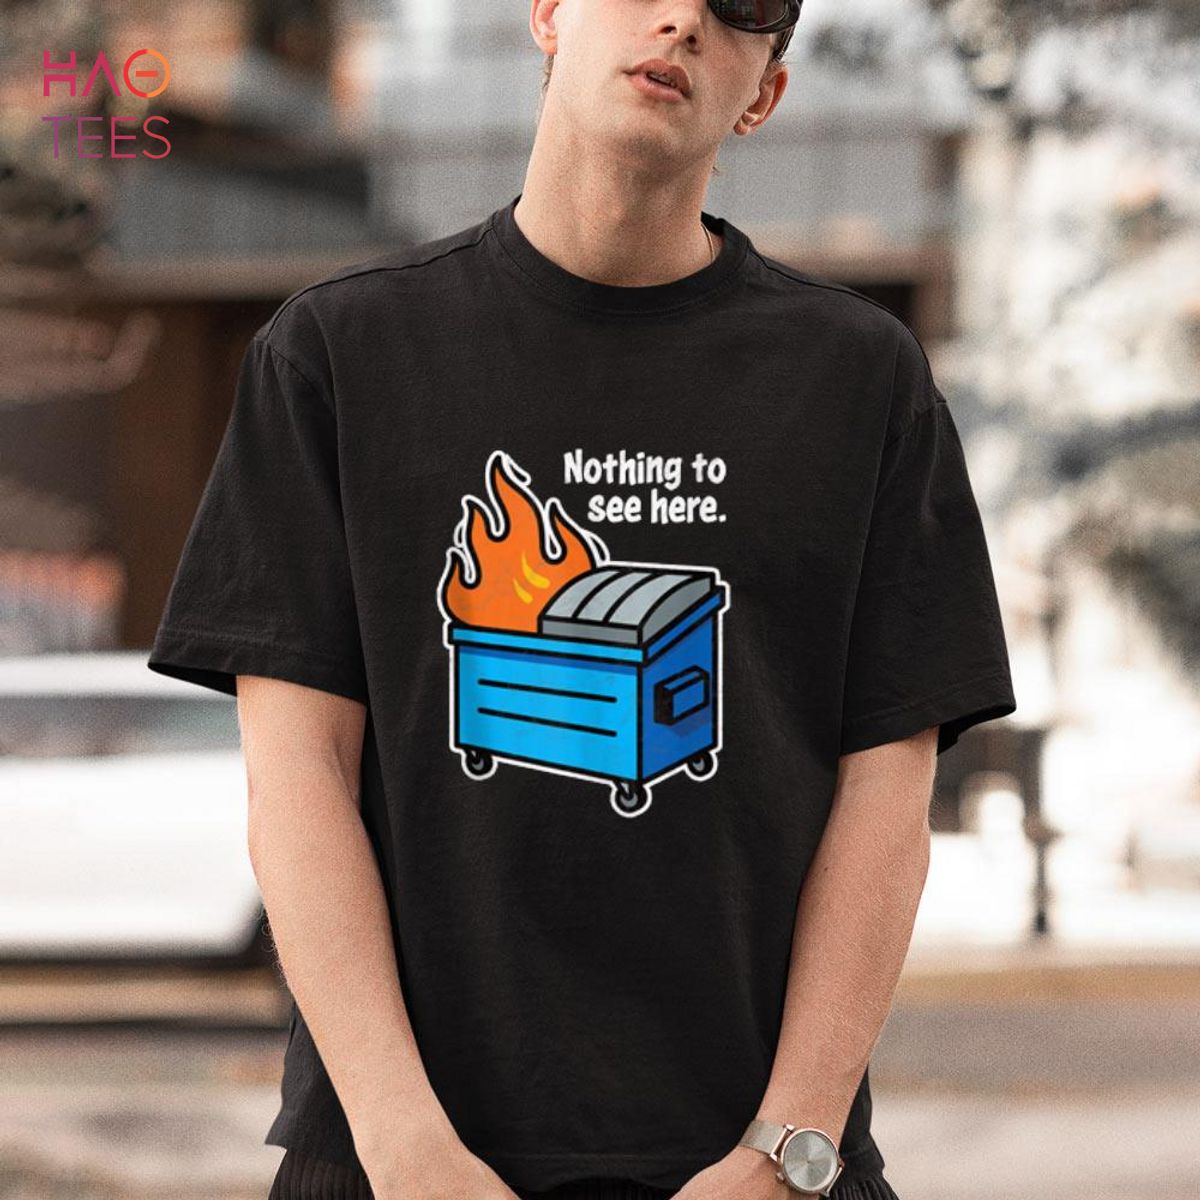 NOTHING TO SEE HERE - funny retro dumpster on fire sarcastic Shirt